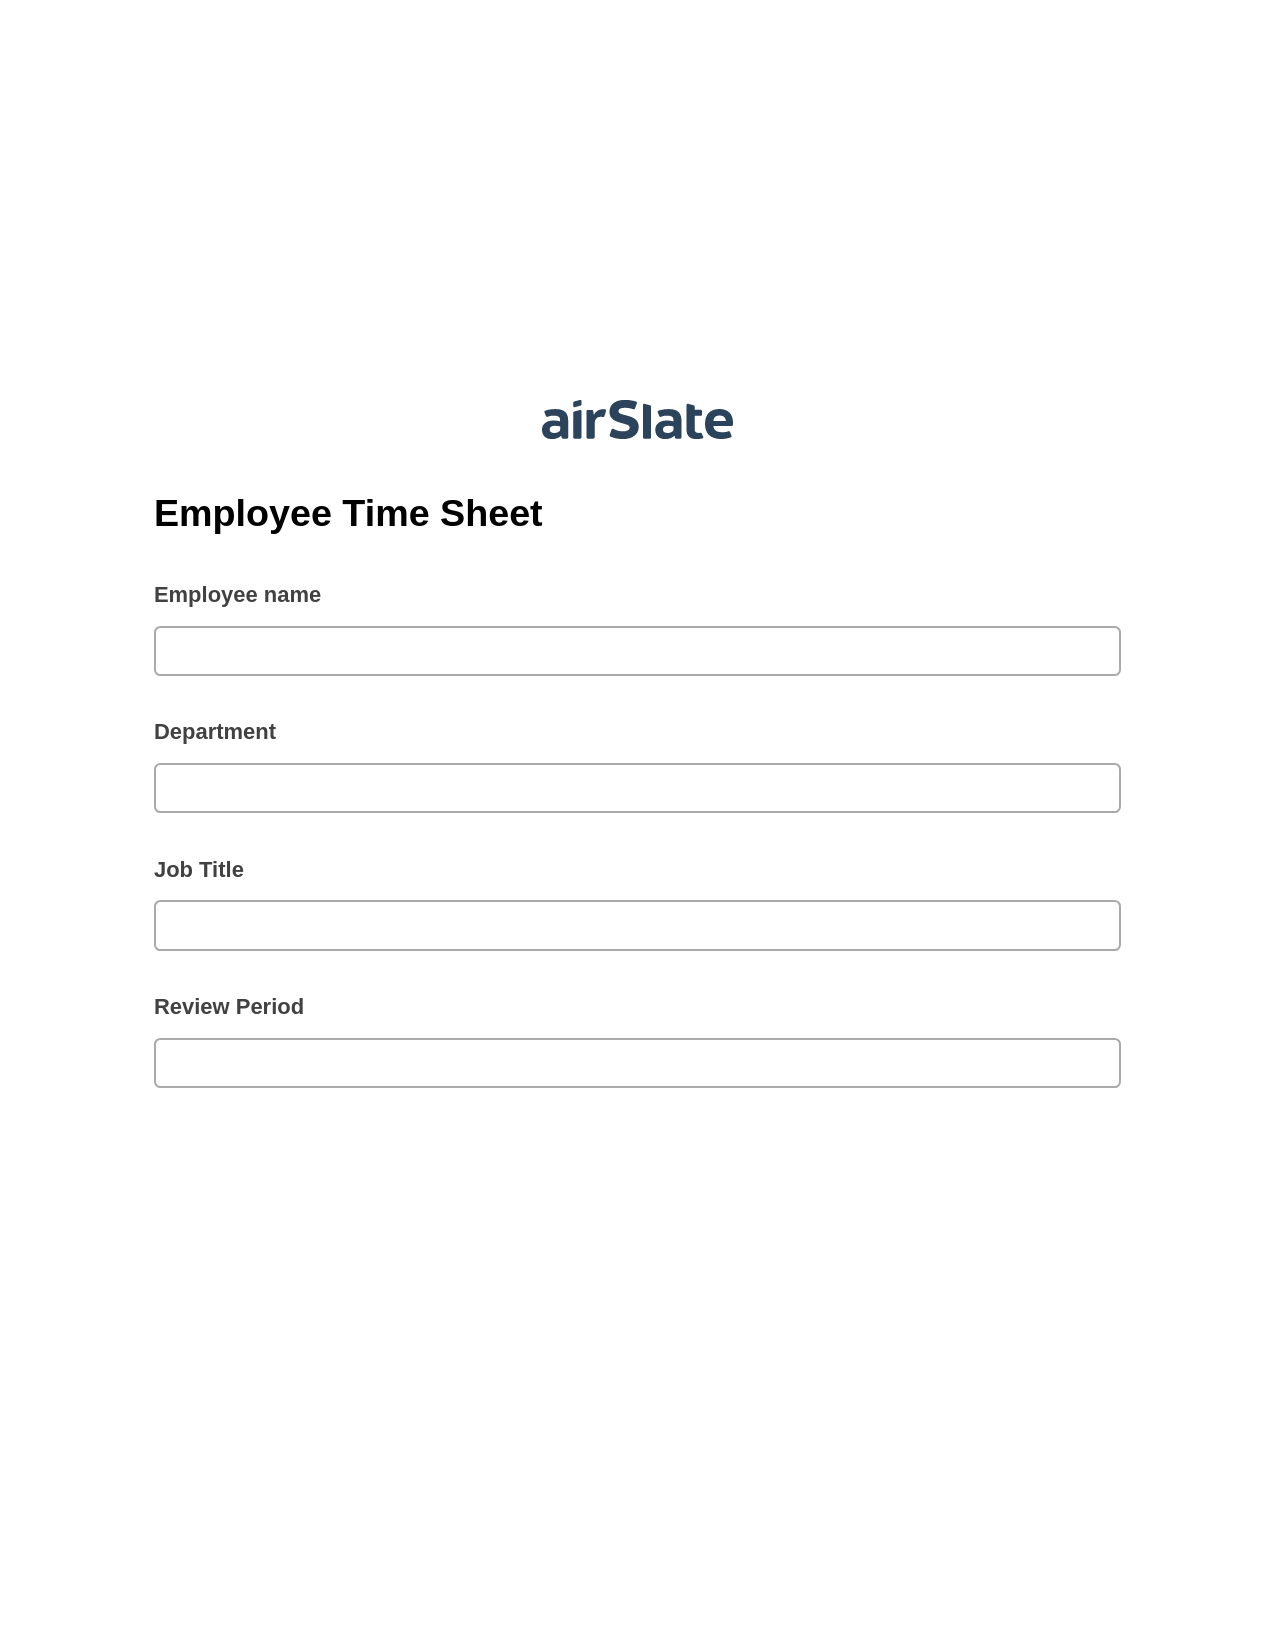 Employee Time Sheet Pre-fill from Office 365 Excel Bot, Update Audit Trail Bot, Archive to SharePoint Folder Bot